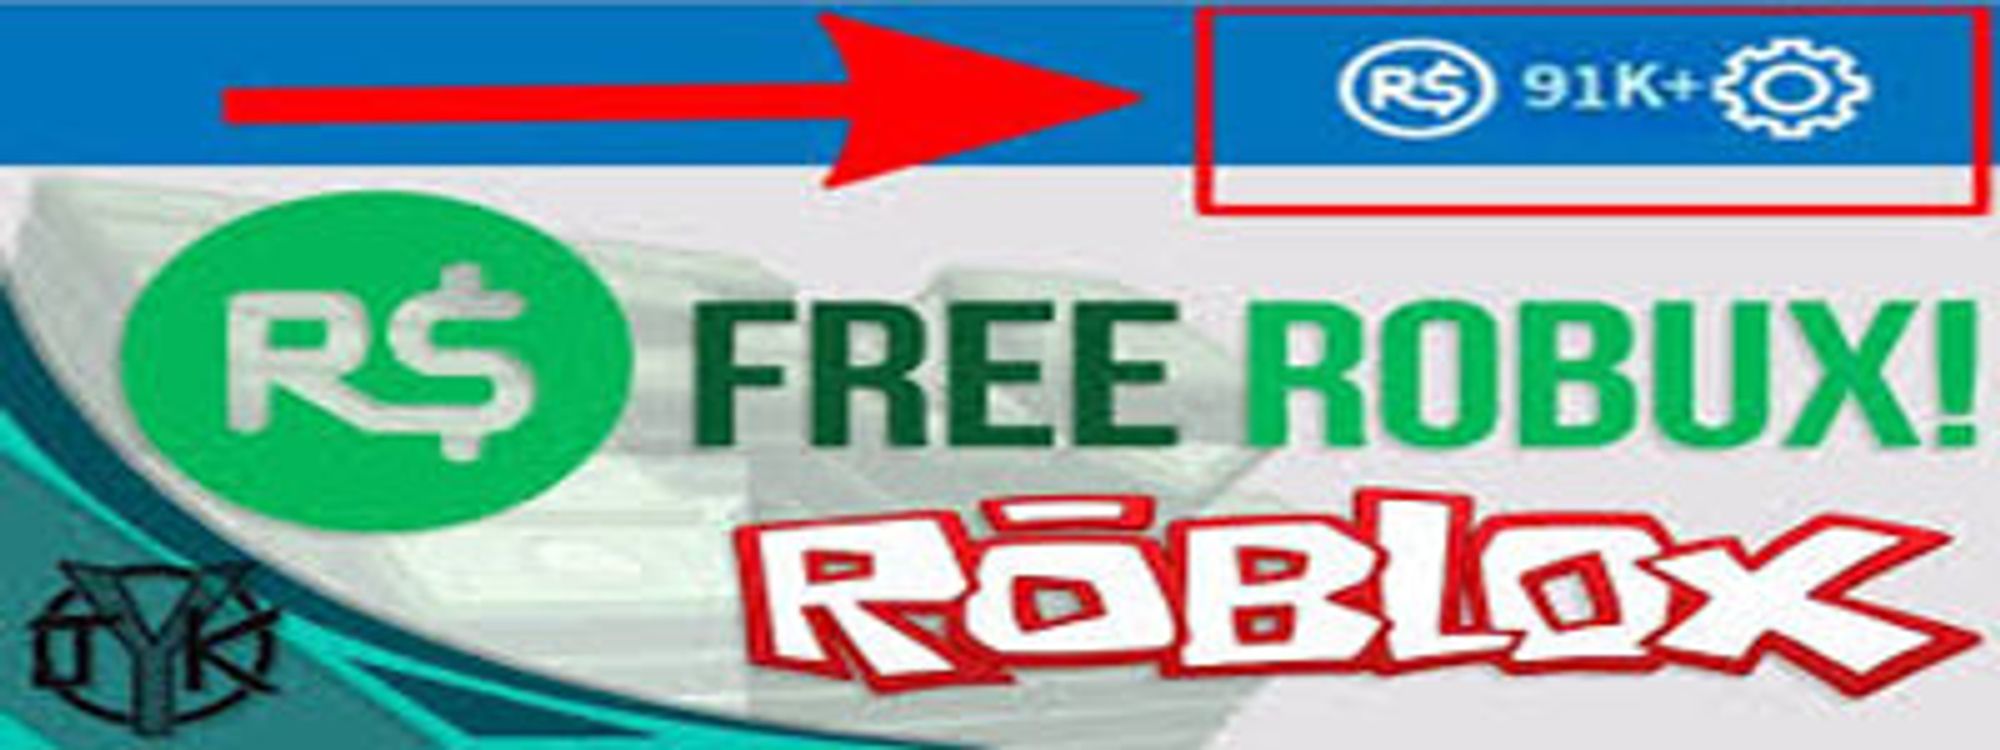 Roblox Robux Free Roblox Robux Codes With Skins Password Account 2020 - roblox joker face free robux computer 2018